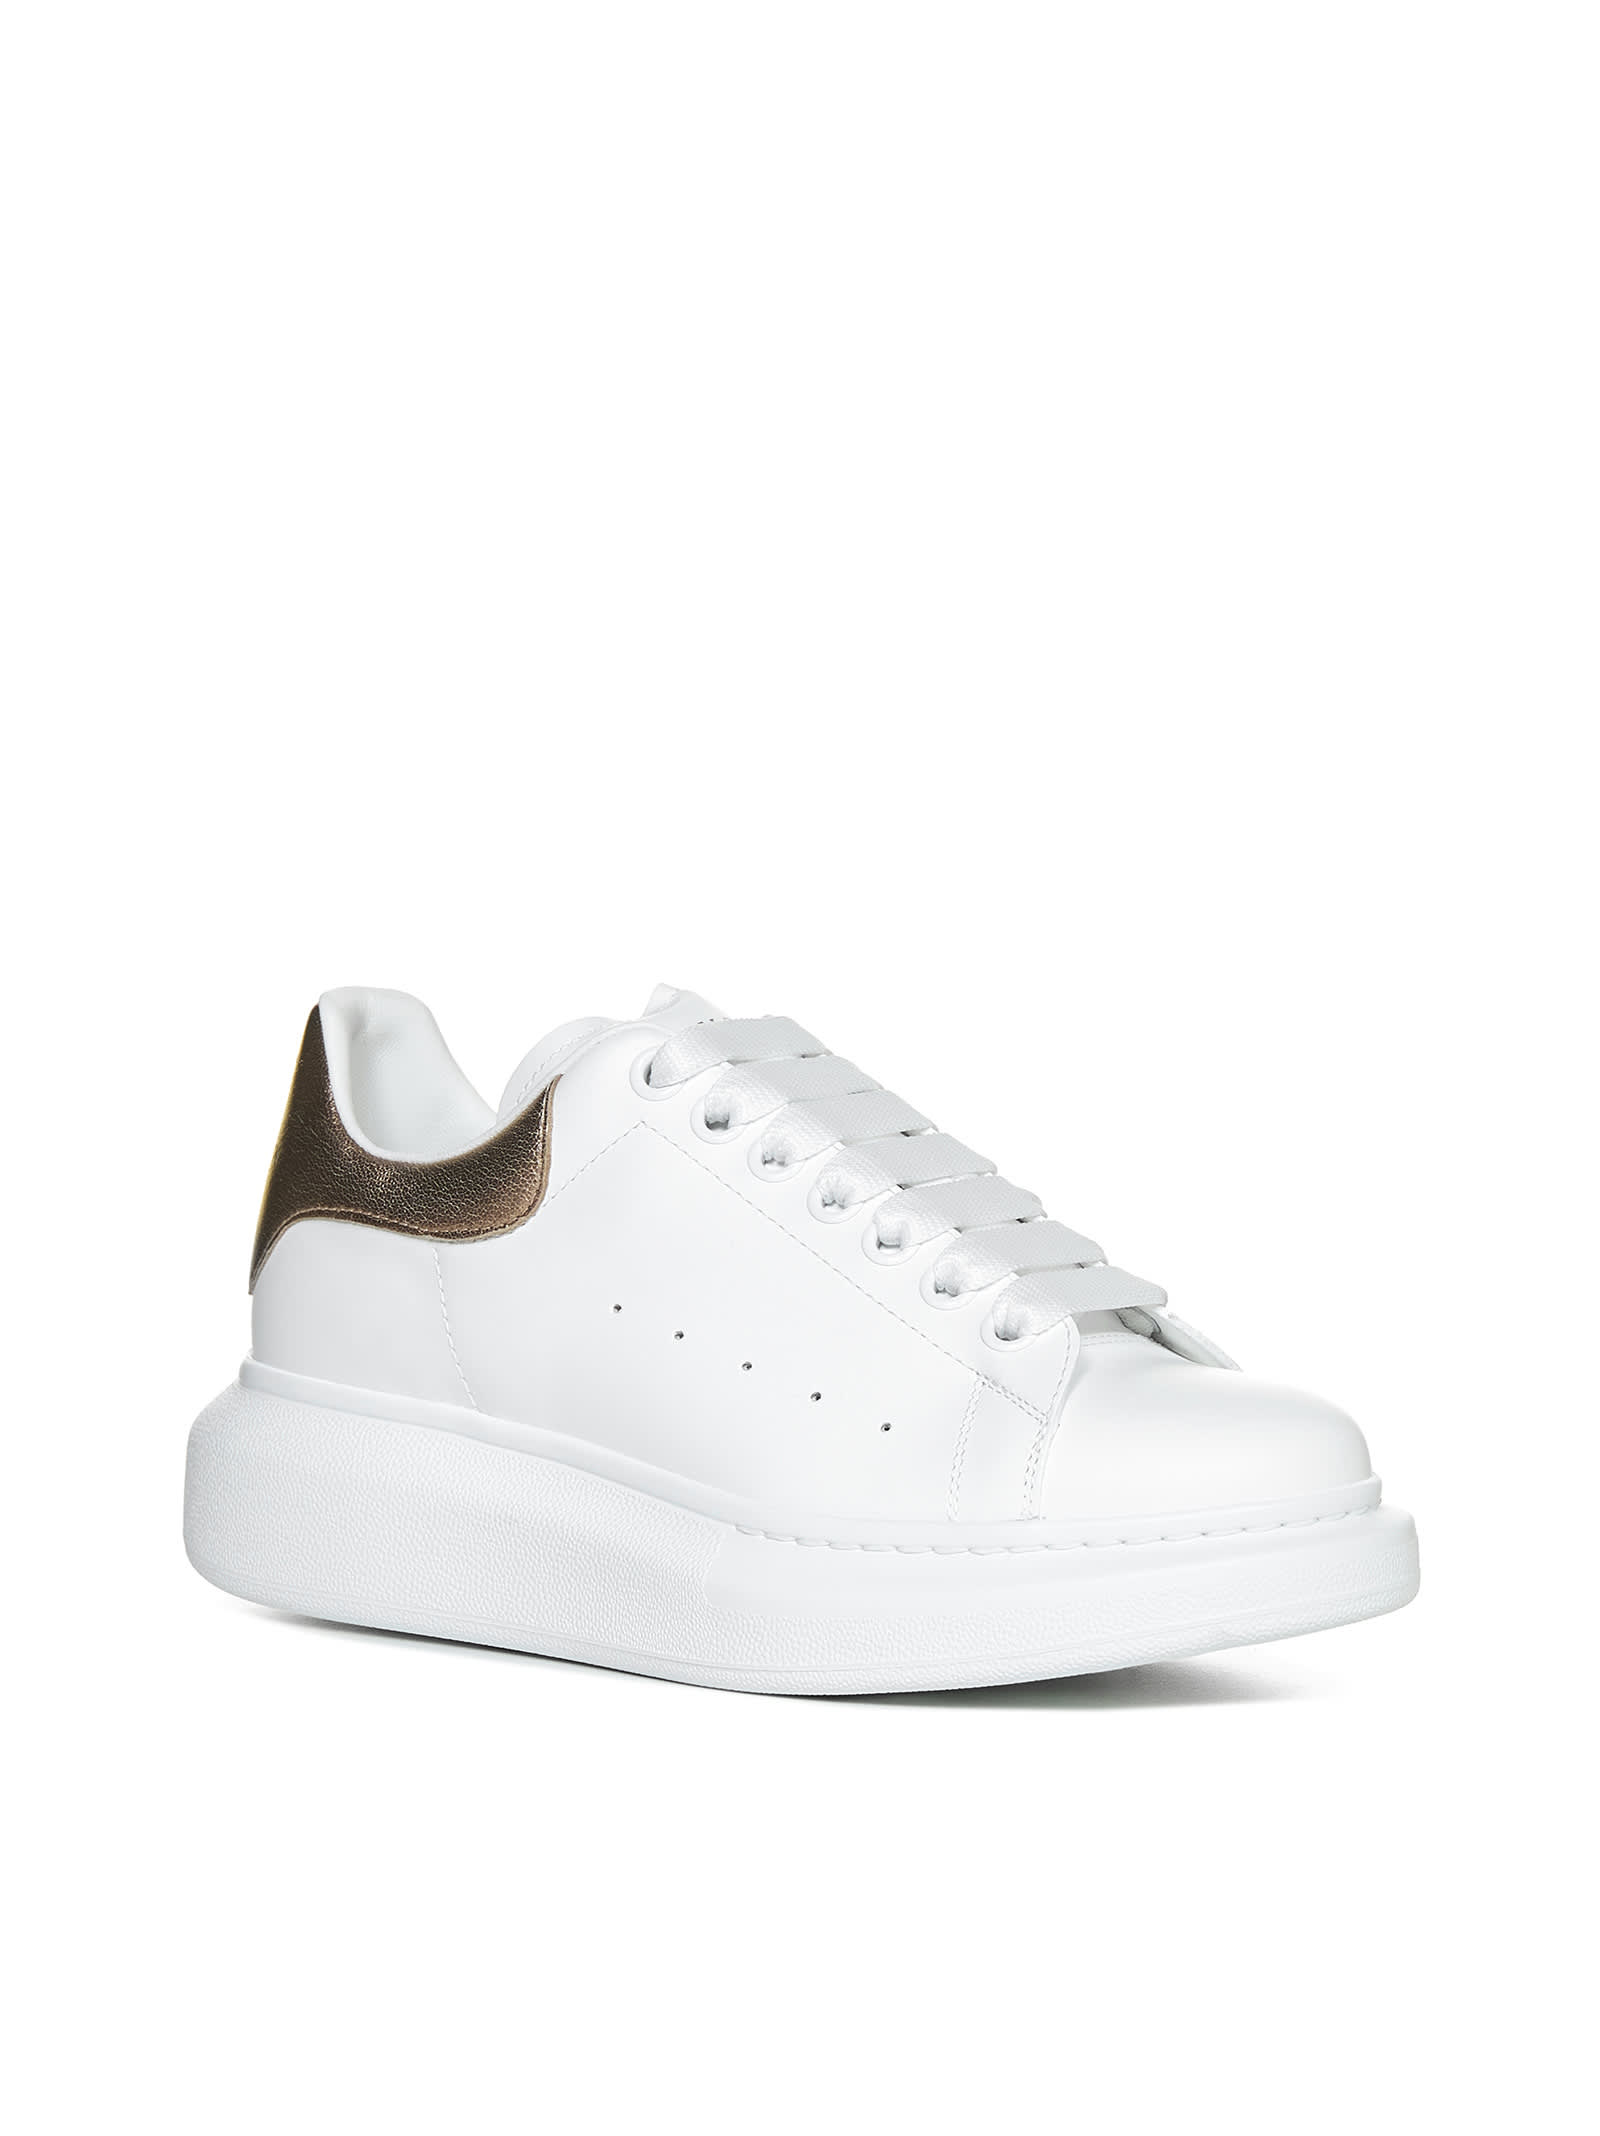 Shop Alexander Mcqueen Sneakers In White/rose Gold 171